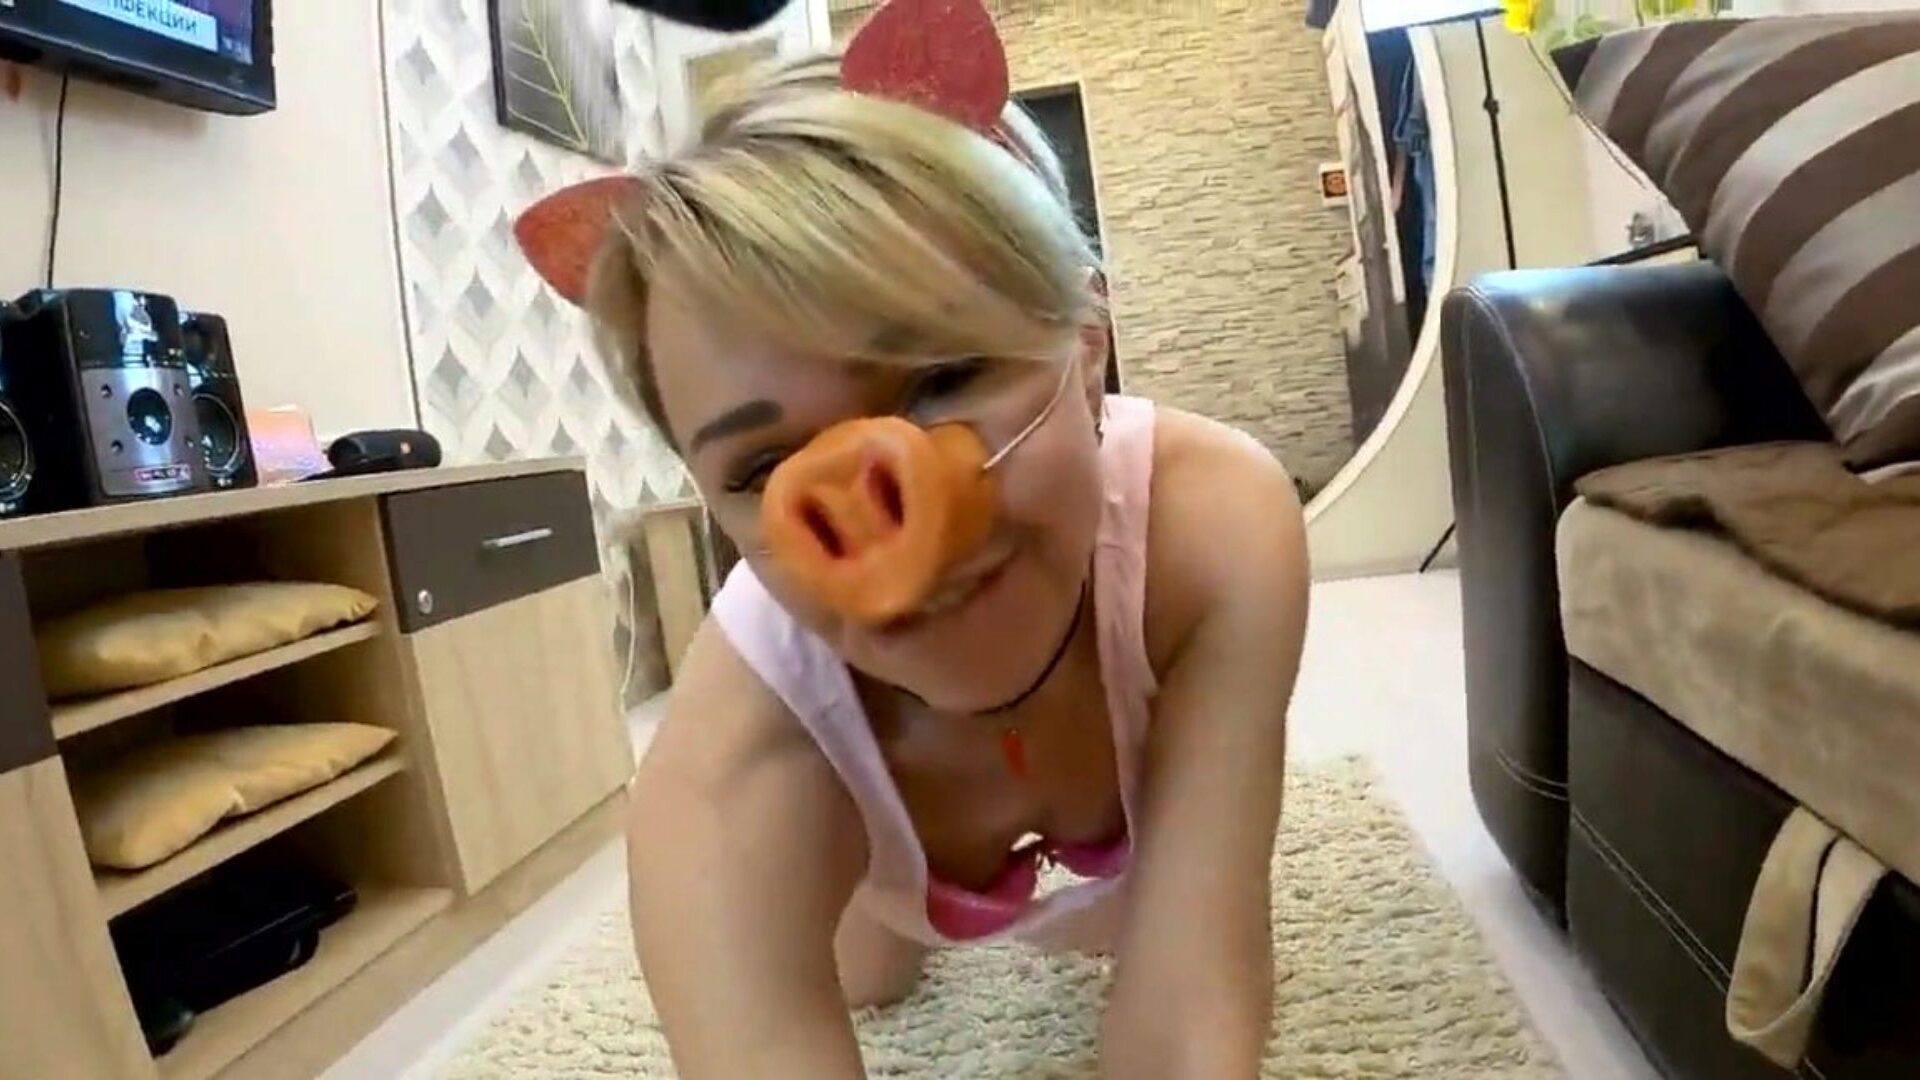 Piggie Deep Sucking Big Dick & Ass Fucking - Facial... Watch Piggie Deep Sucking Big Dick & Ass Fucking - Facial Cumshot episode on xHamster - the ultimate collection of free MILF & Hardcore HD pornography tube movies